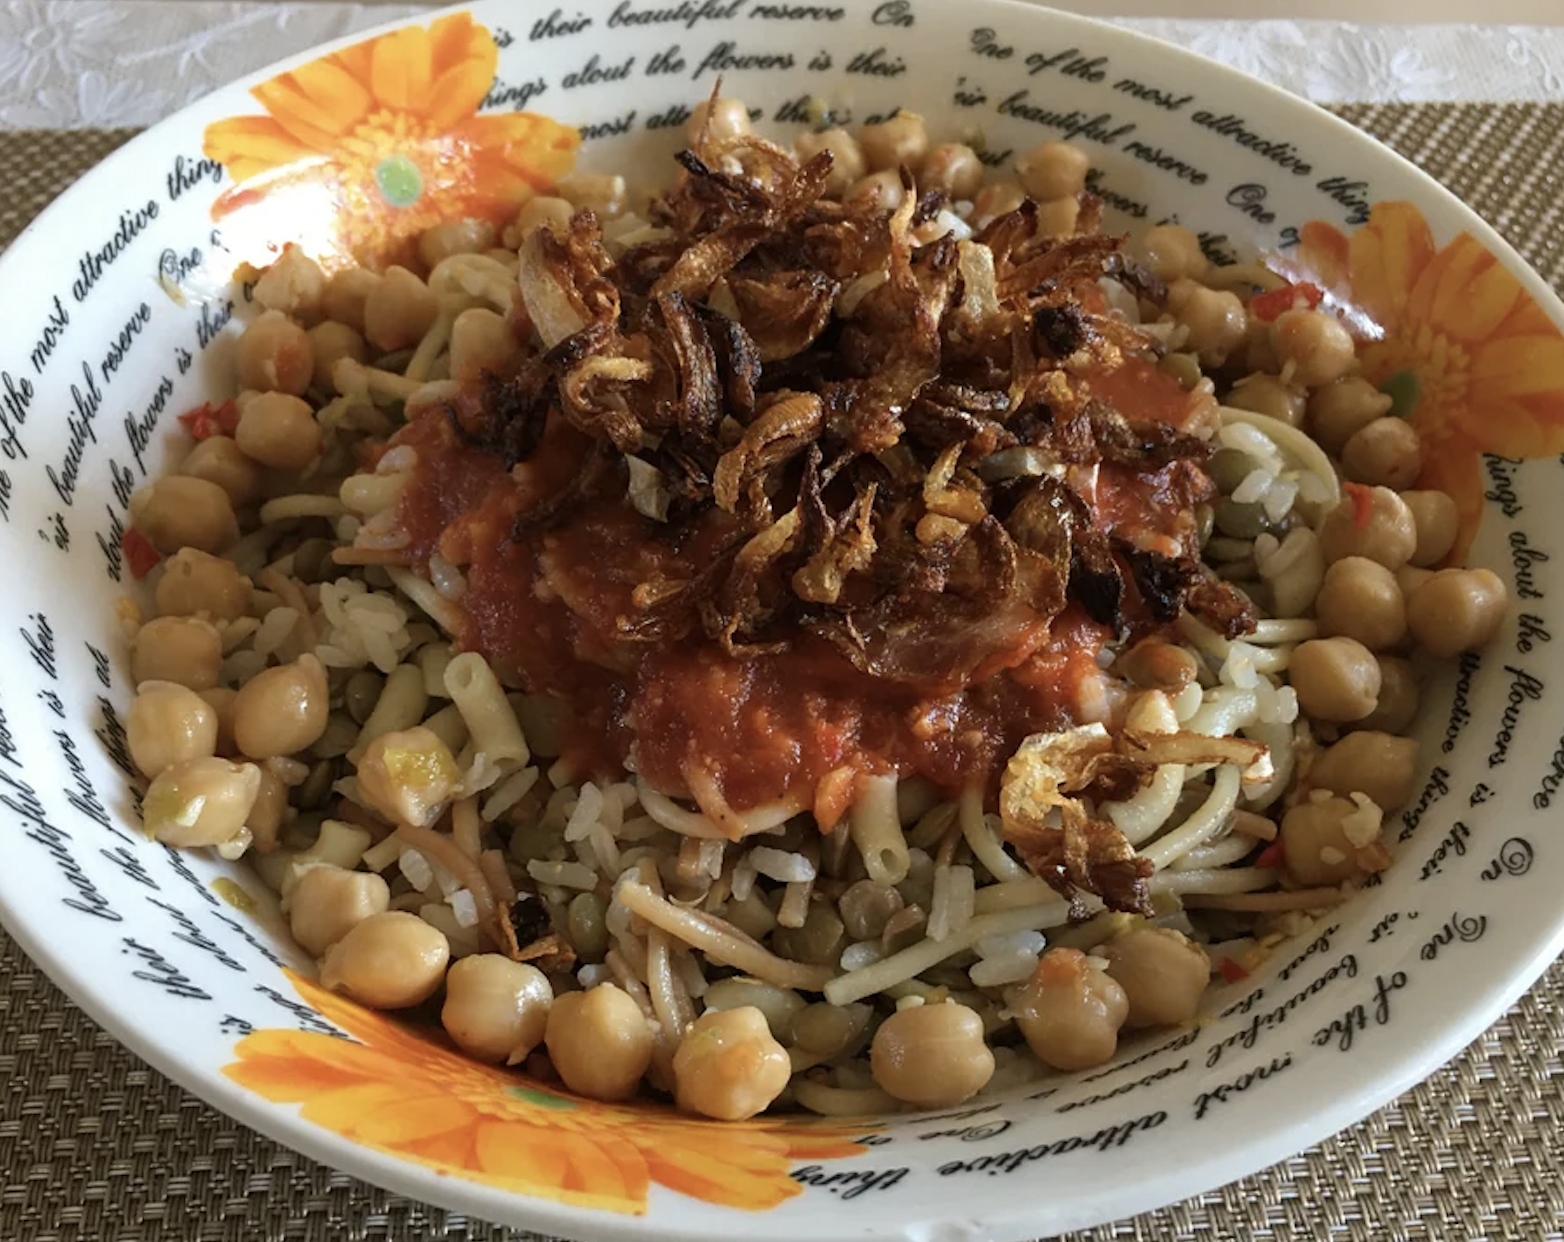 A plate of koshari with lentils, rice, pasta, chickpeas, tomato sauce, and fried onions